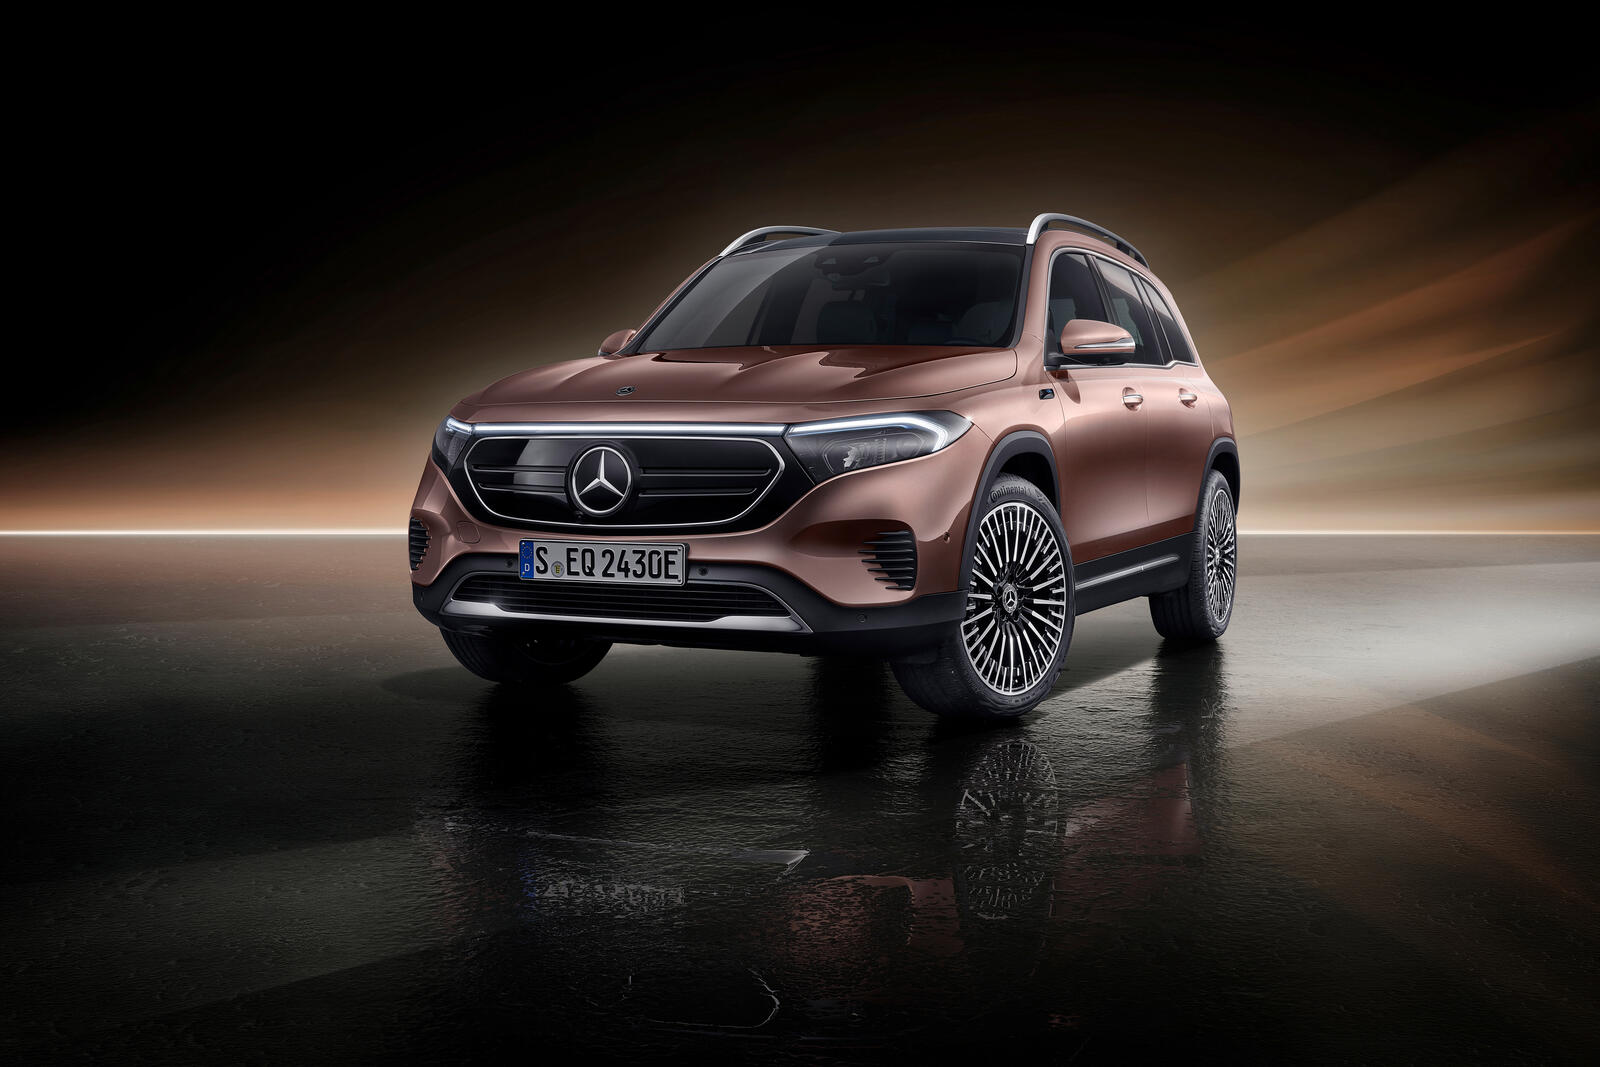 Wallpapers automobiles Mercedes-Benz crossover on the desktop